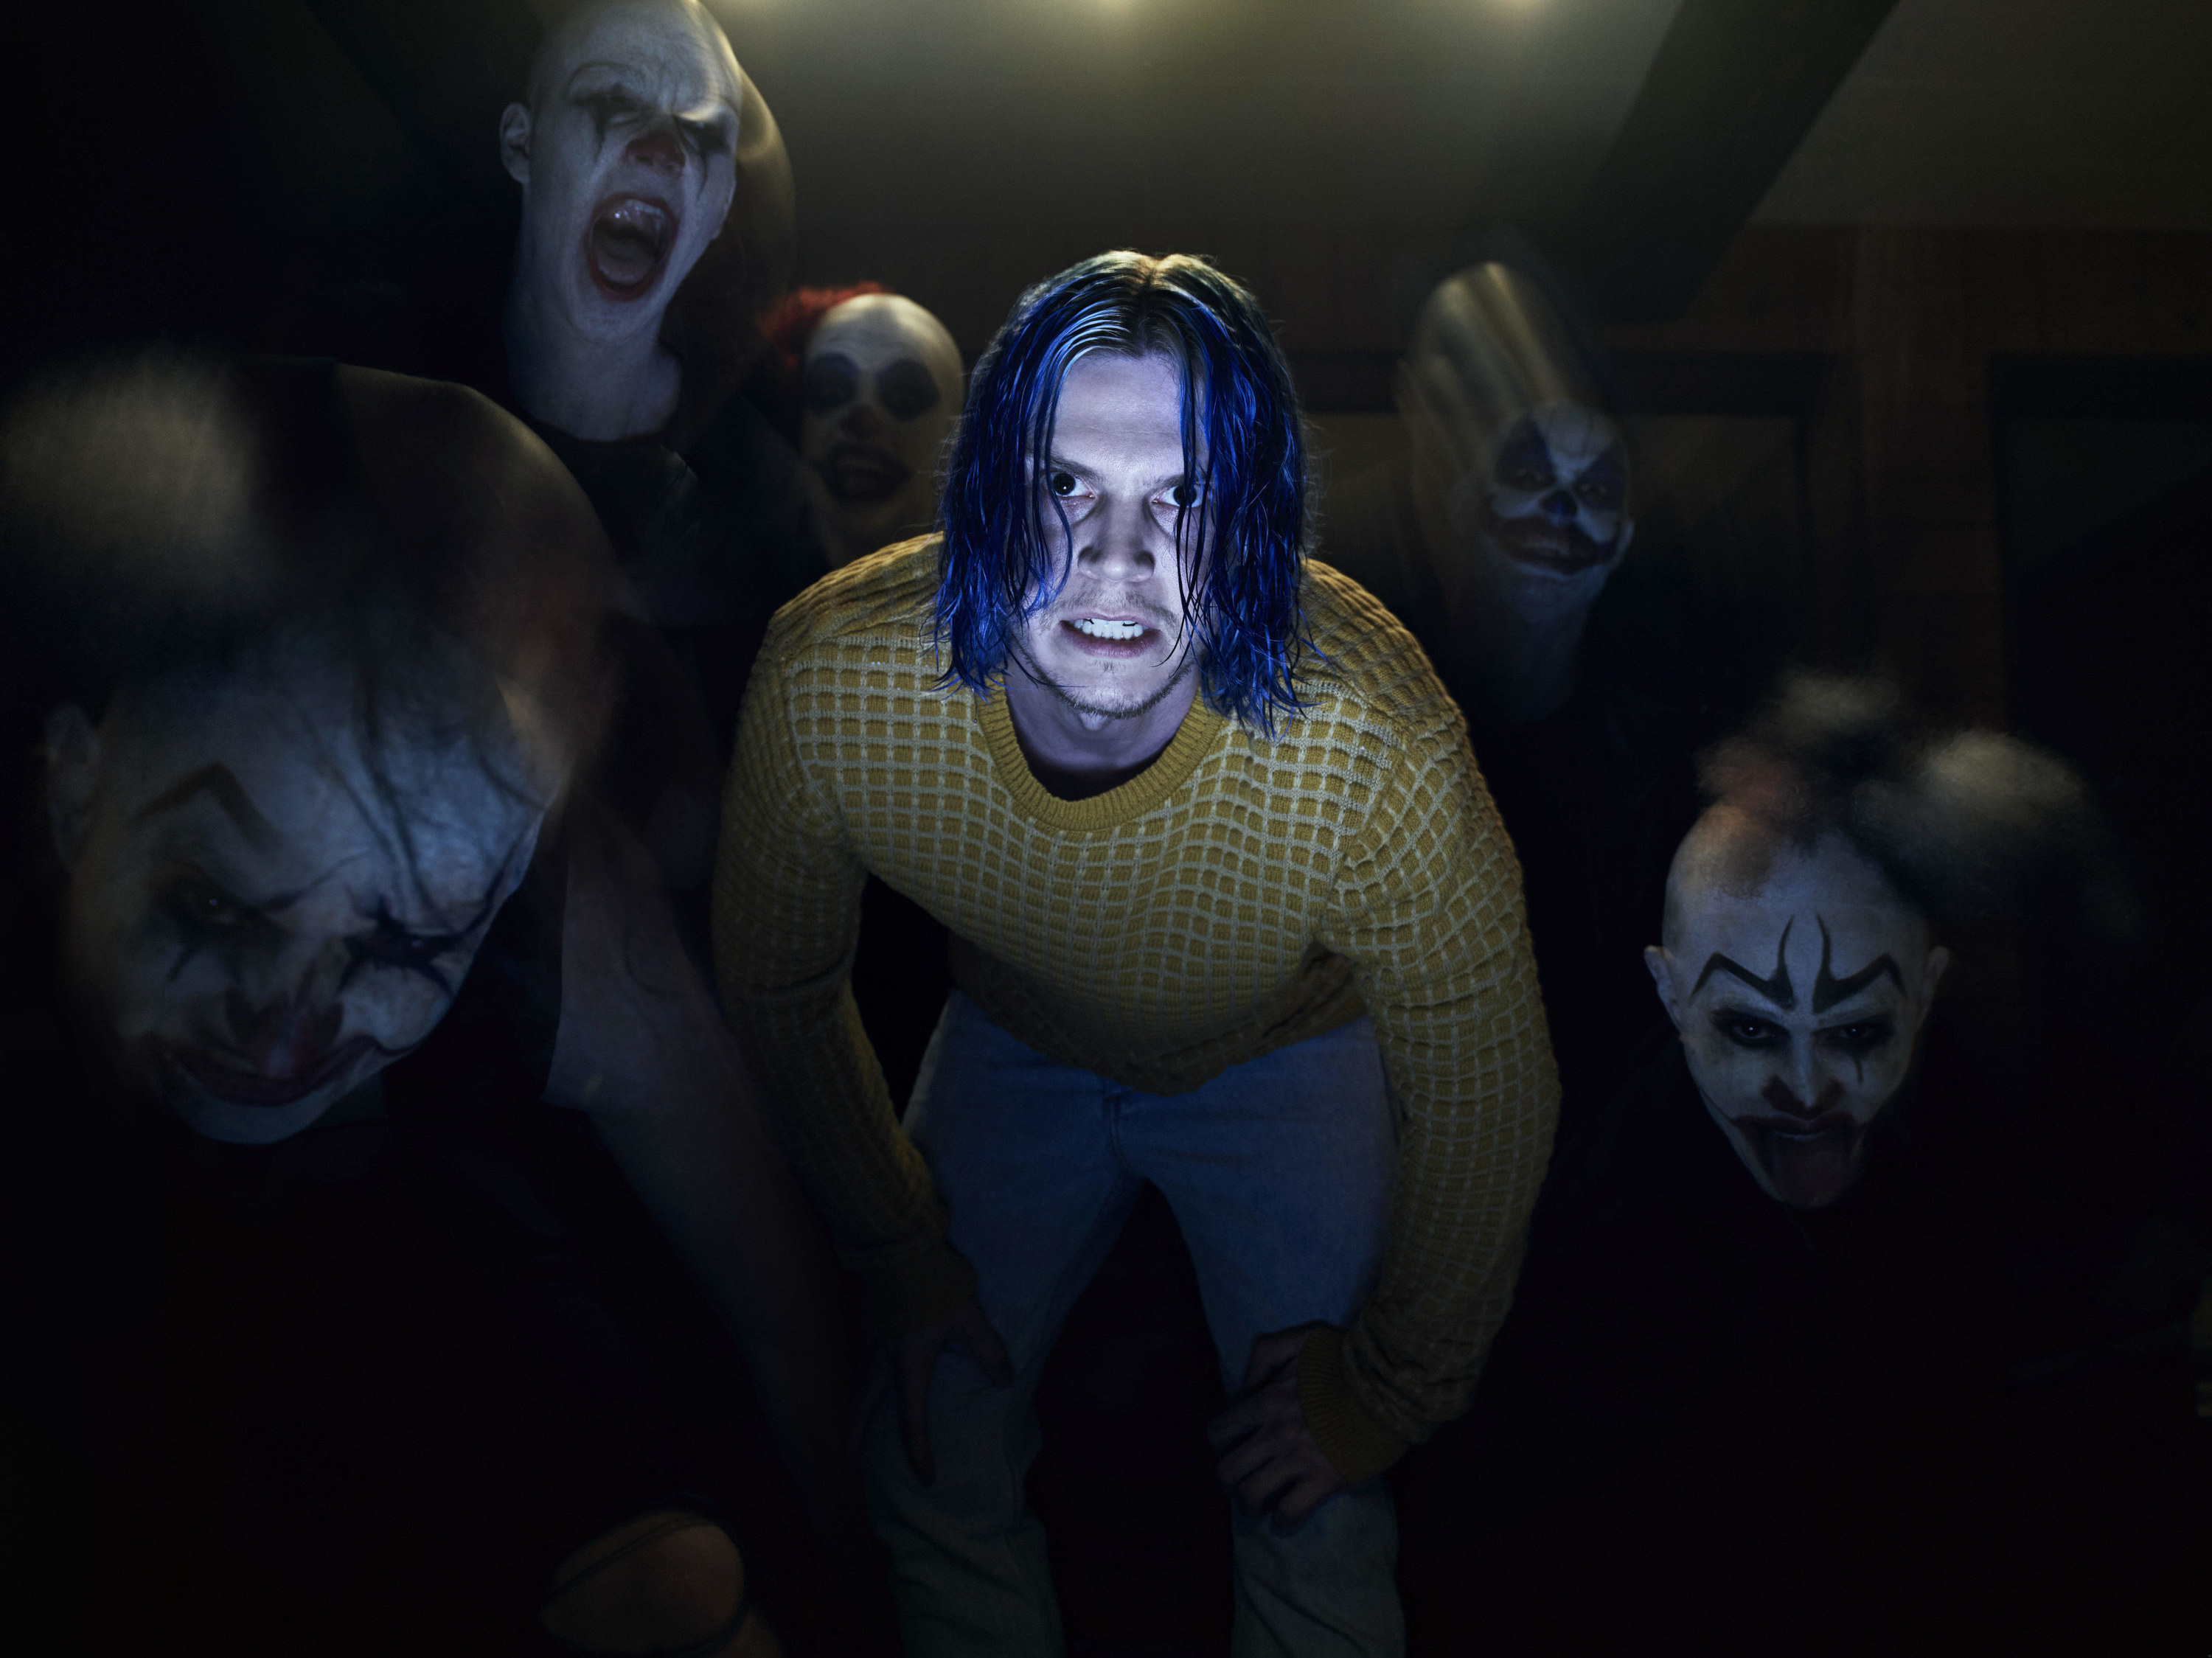 Evan Peters in a promo photo for &quot;AHS: Cult&quot; wearing blue hair